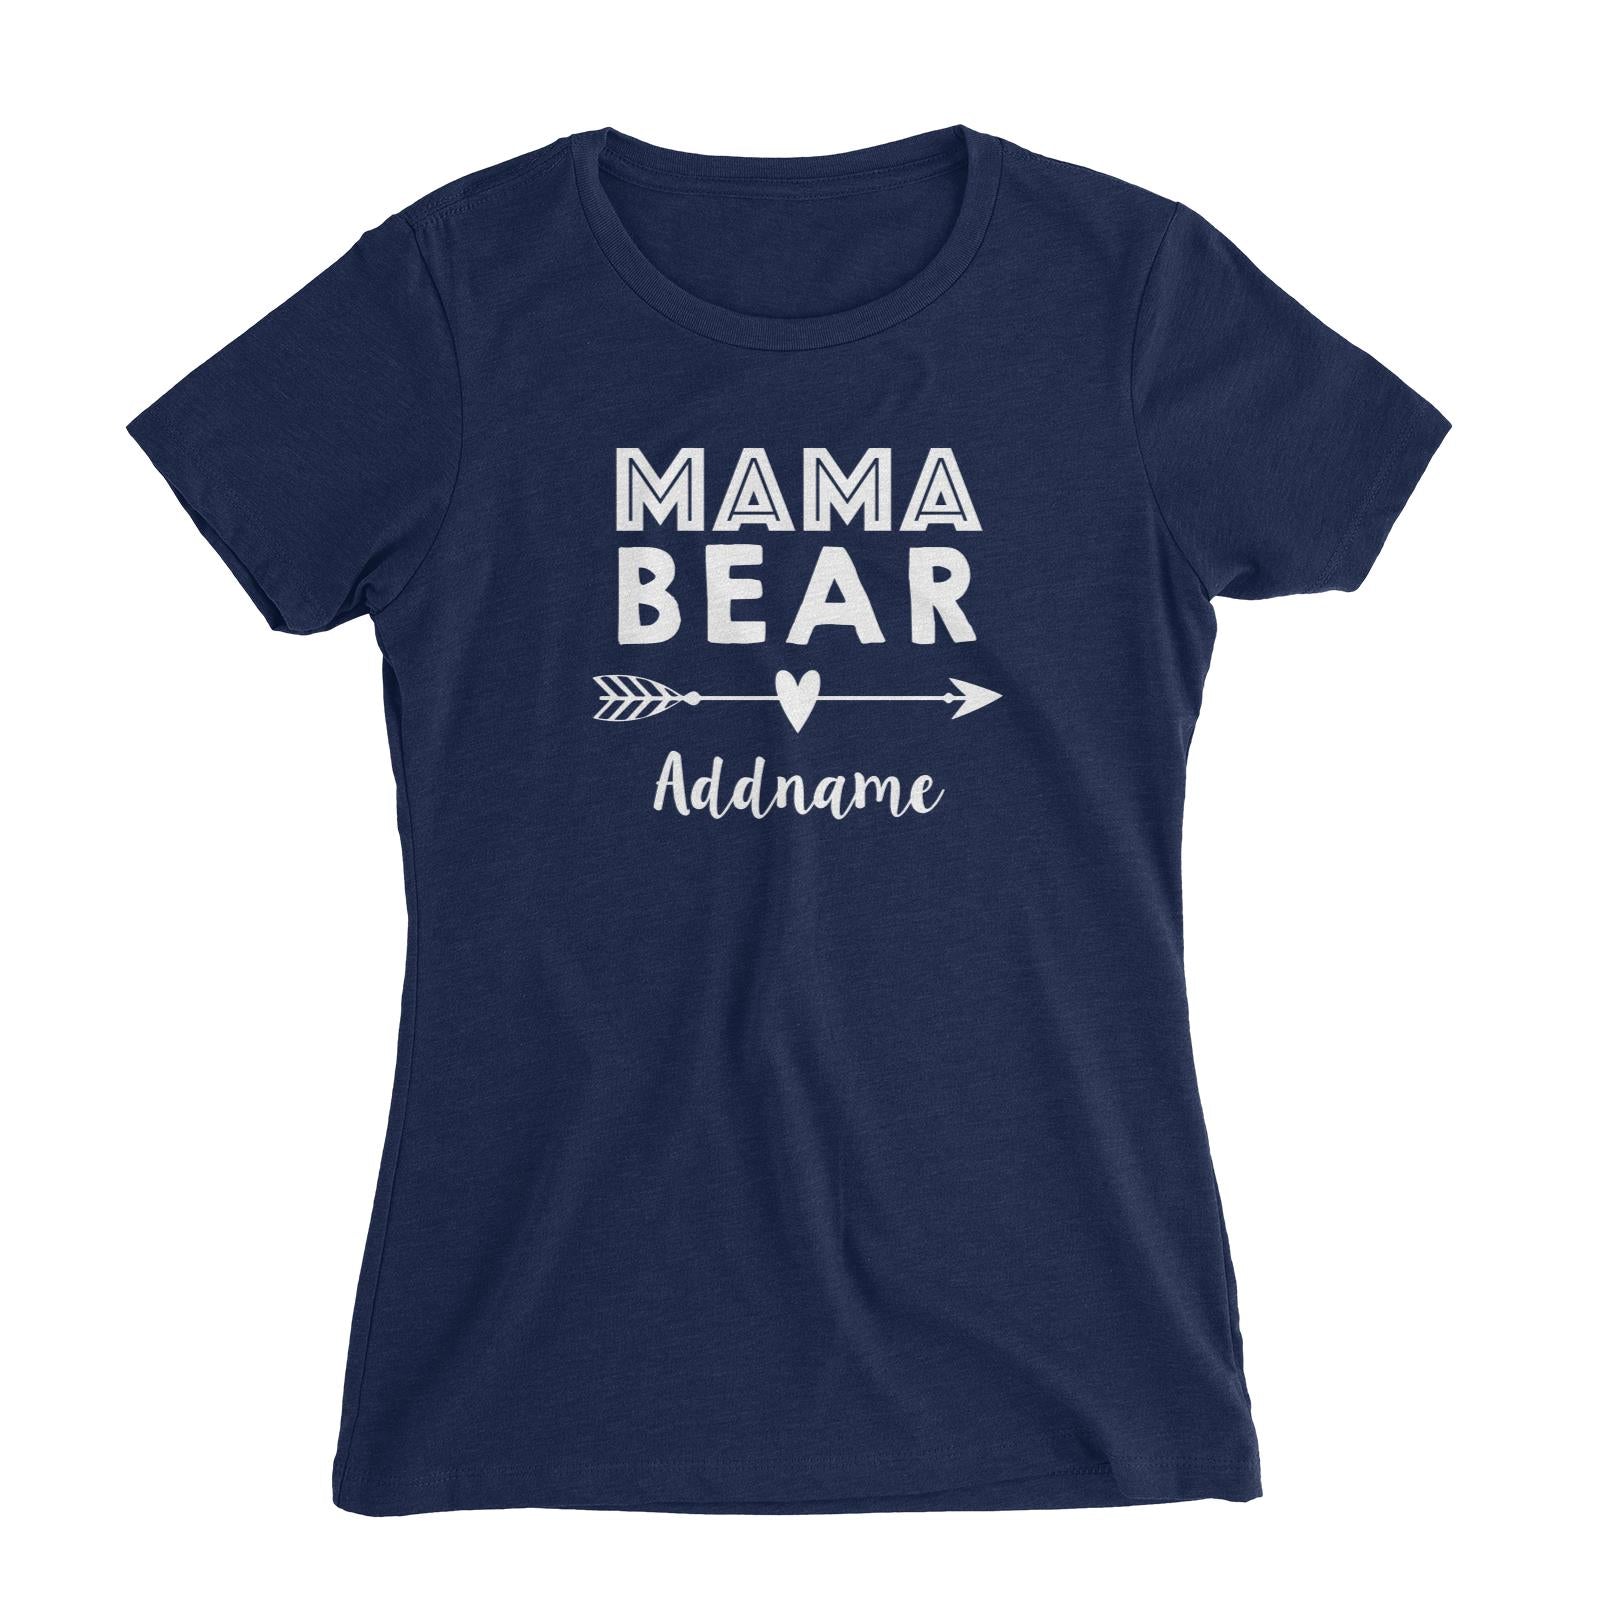 Mama Bear Addname Women's Slim Fit T-Shirt  Matching Family Personalizable Designs